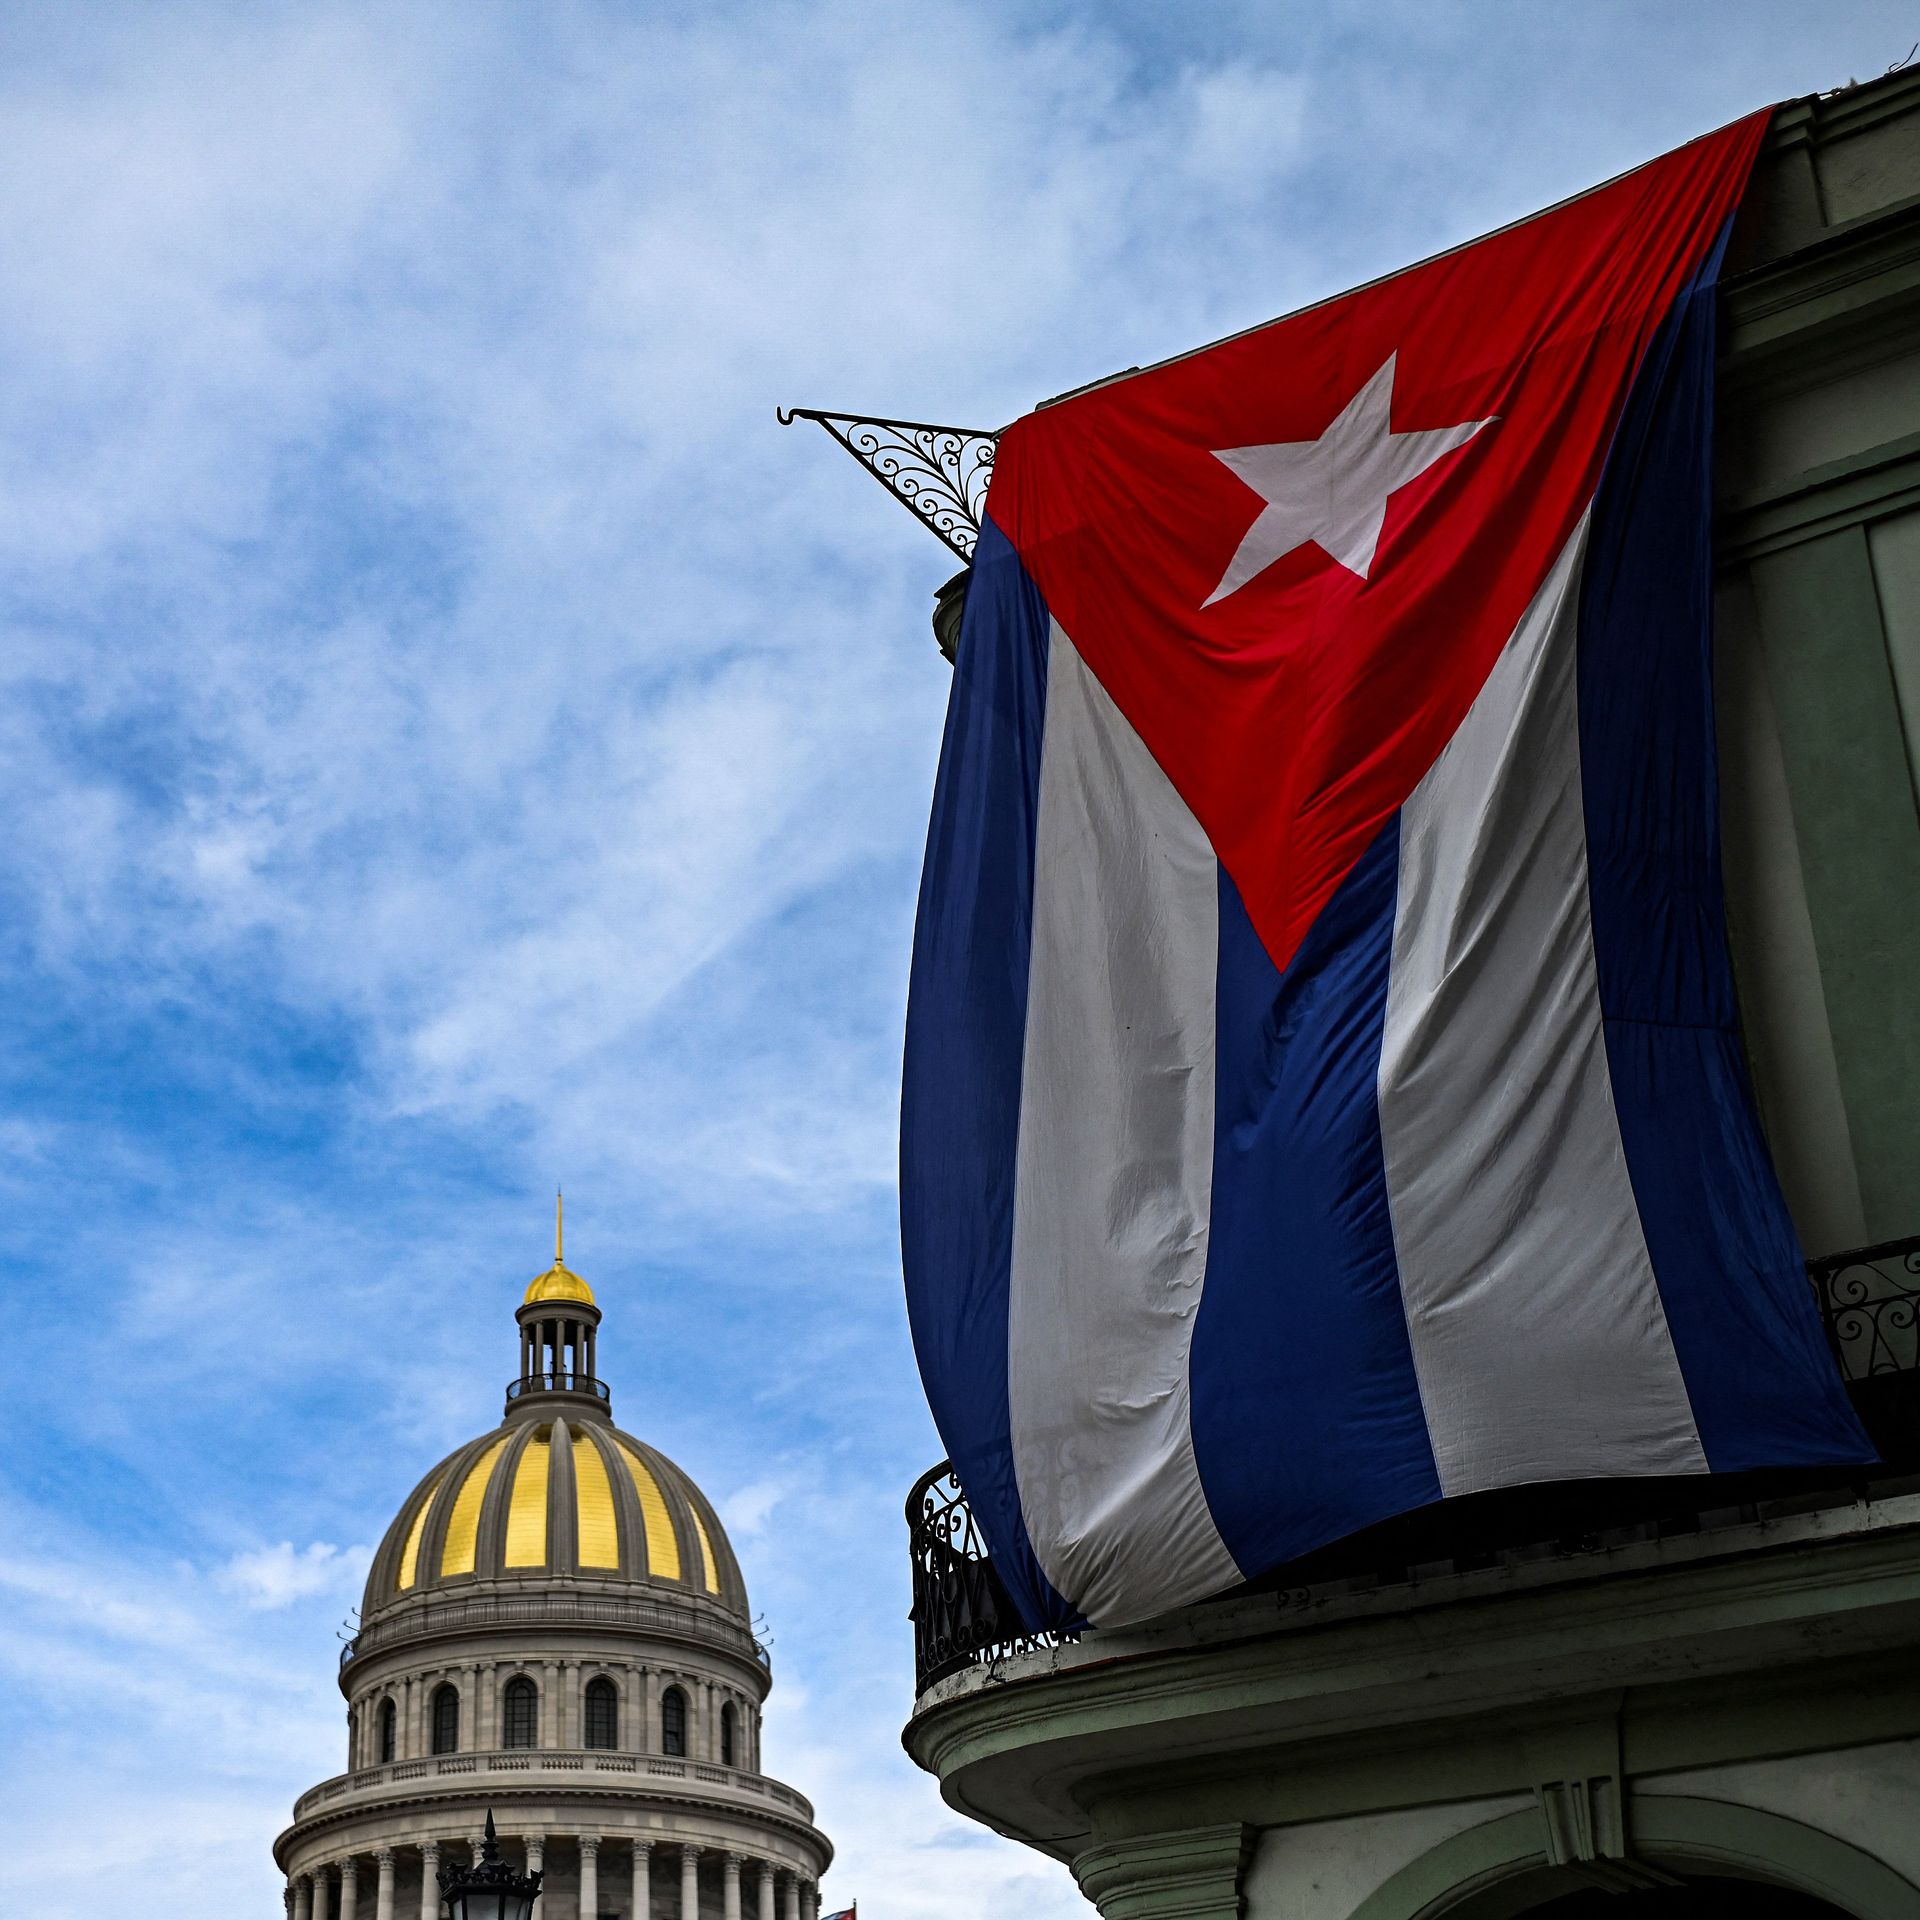 Photo of the Cuban capitol building with a large Cuban flag hanging in the foreground